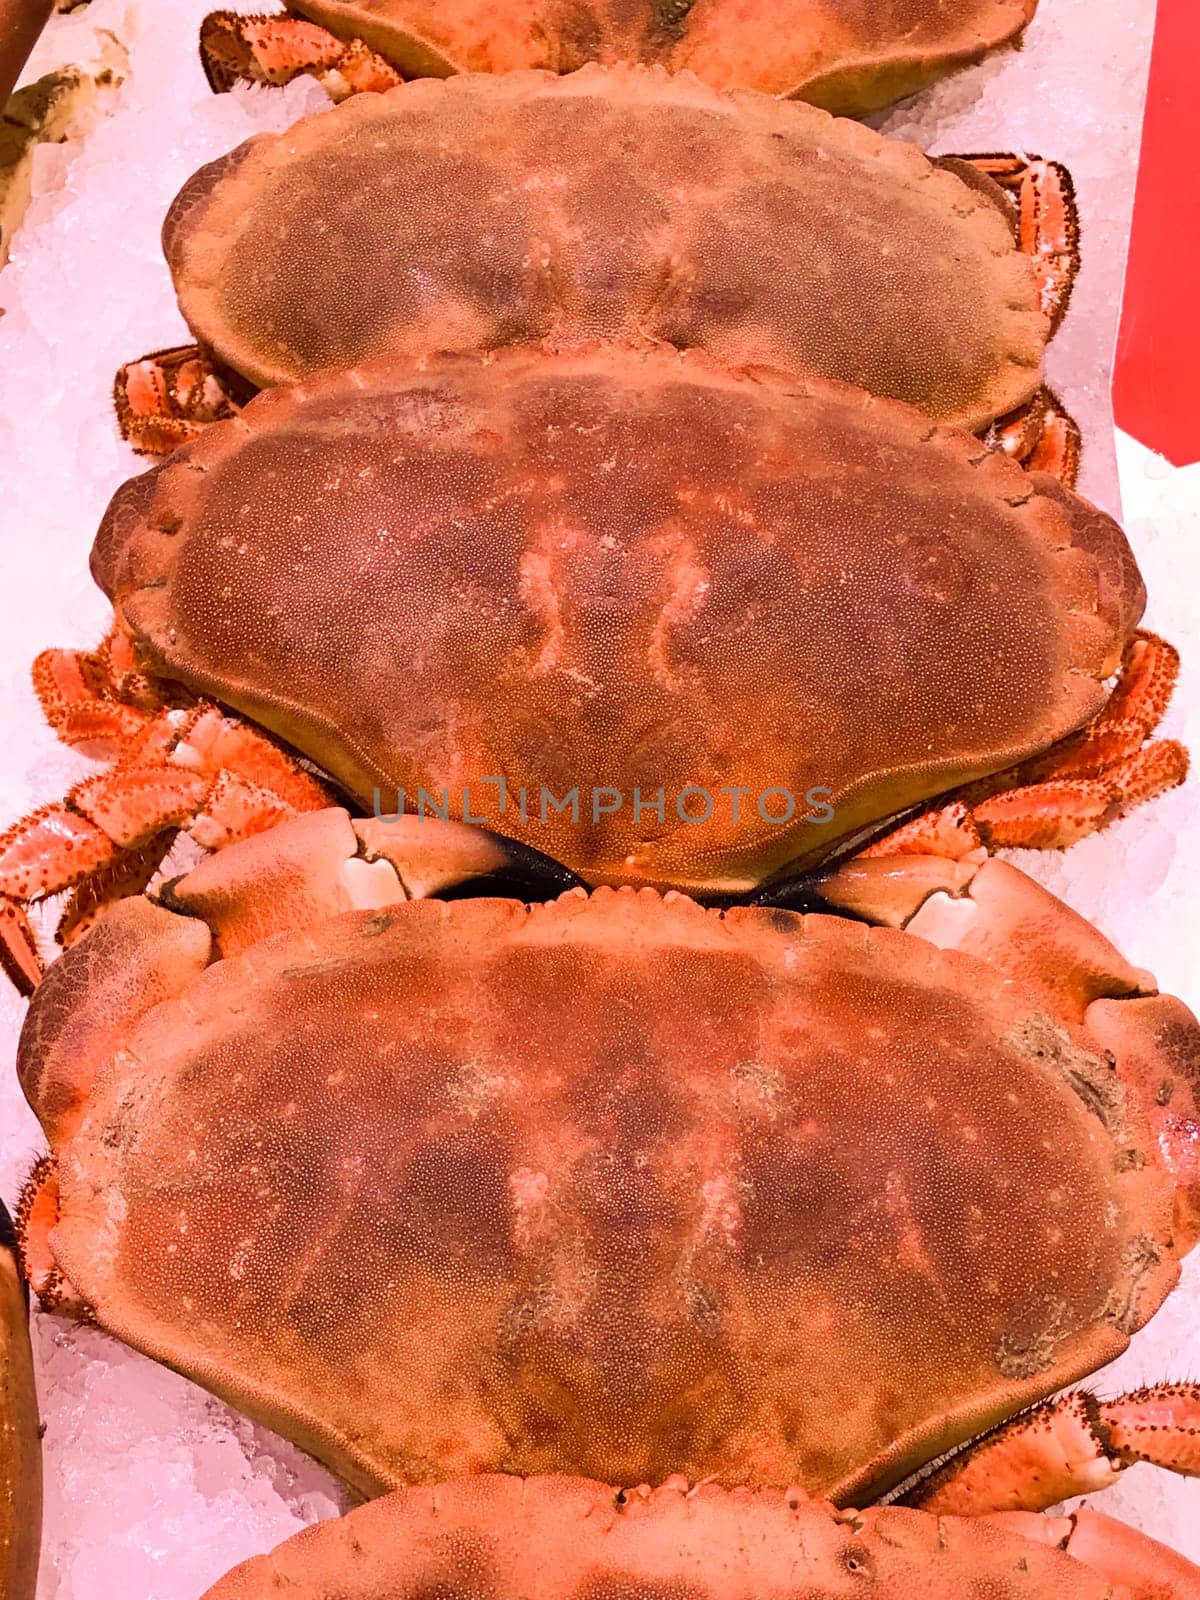 Cooked crabs for sale in the supermarket, Seafood by FreeProd